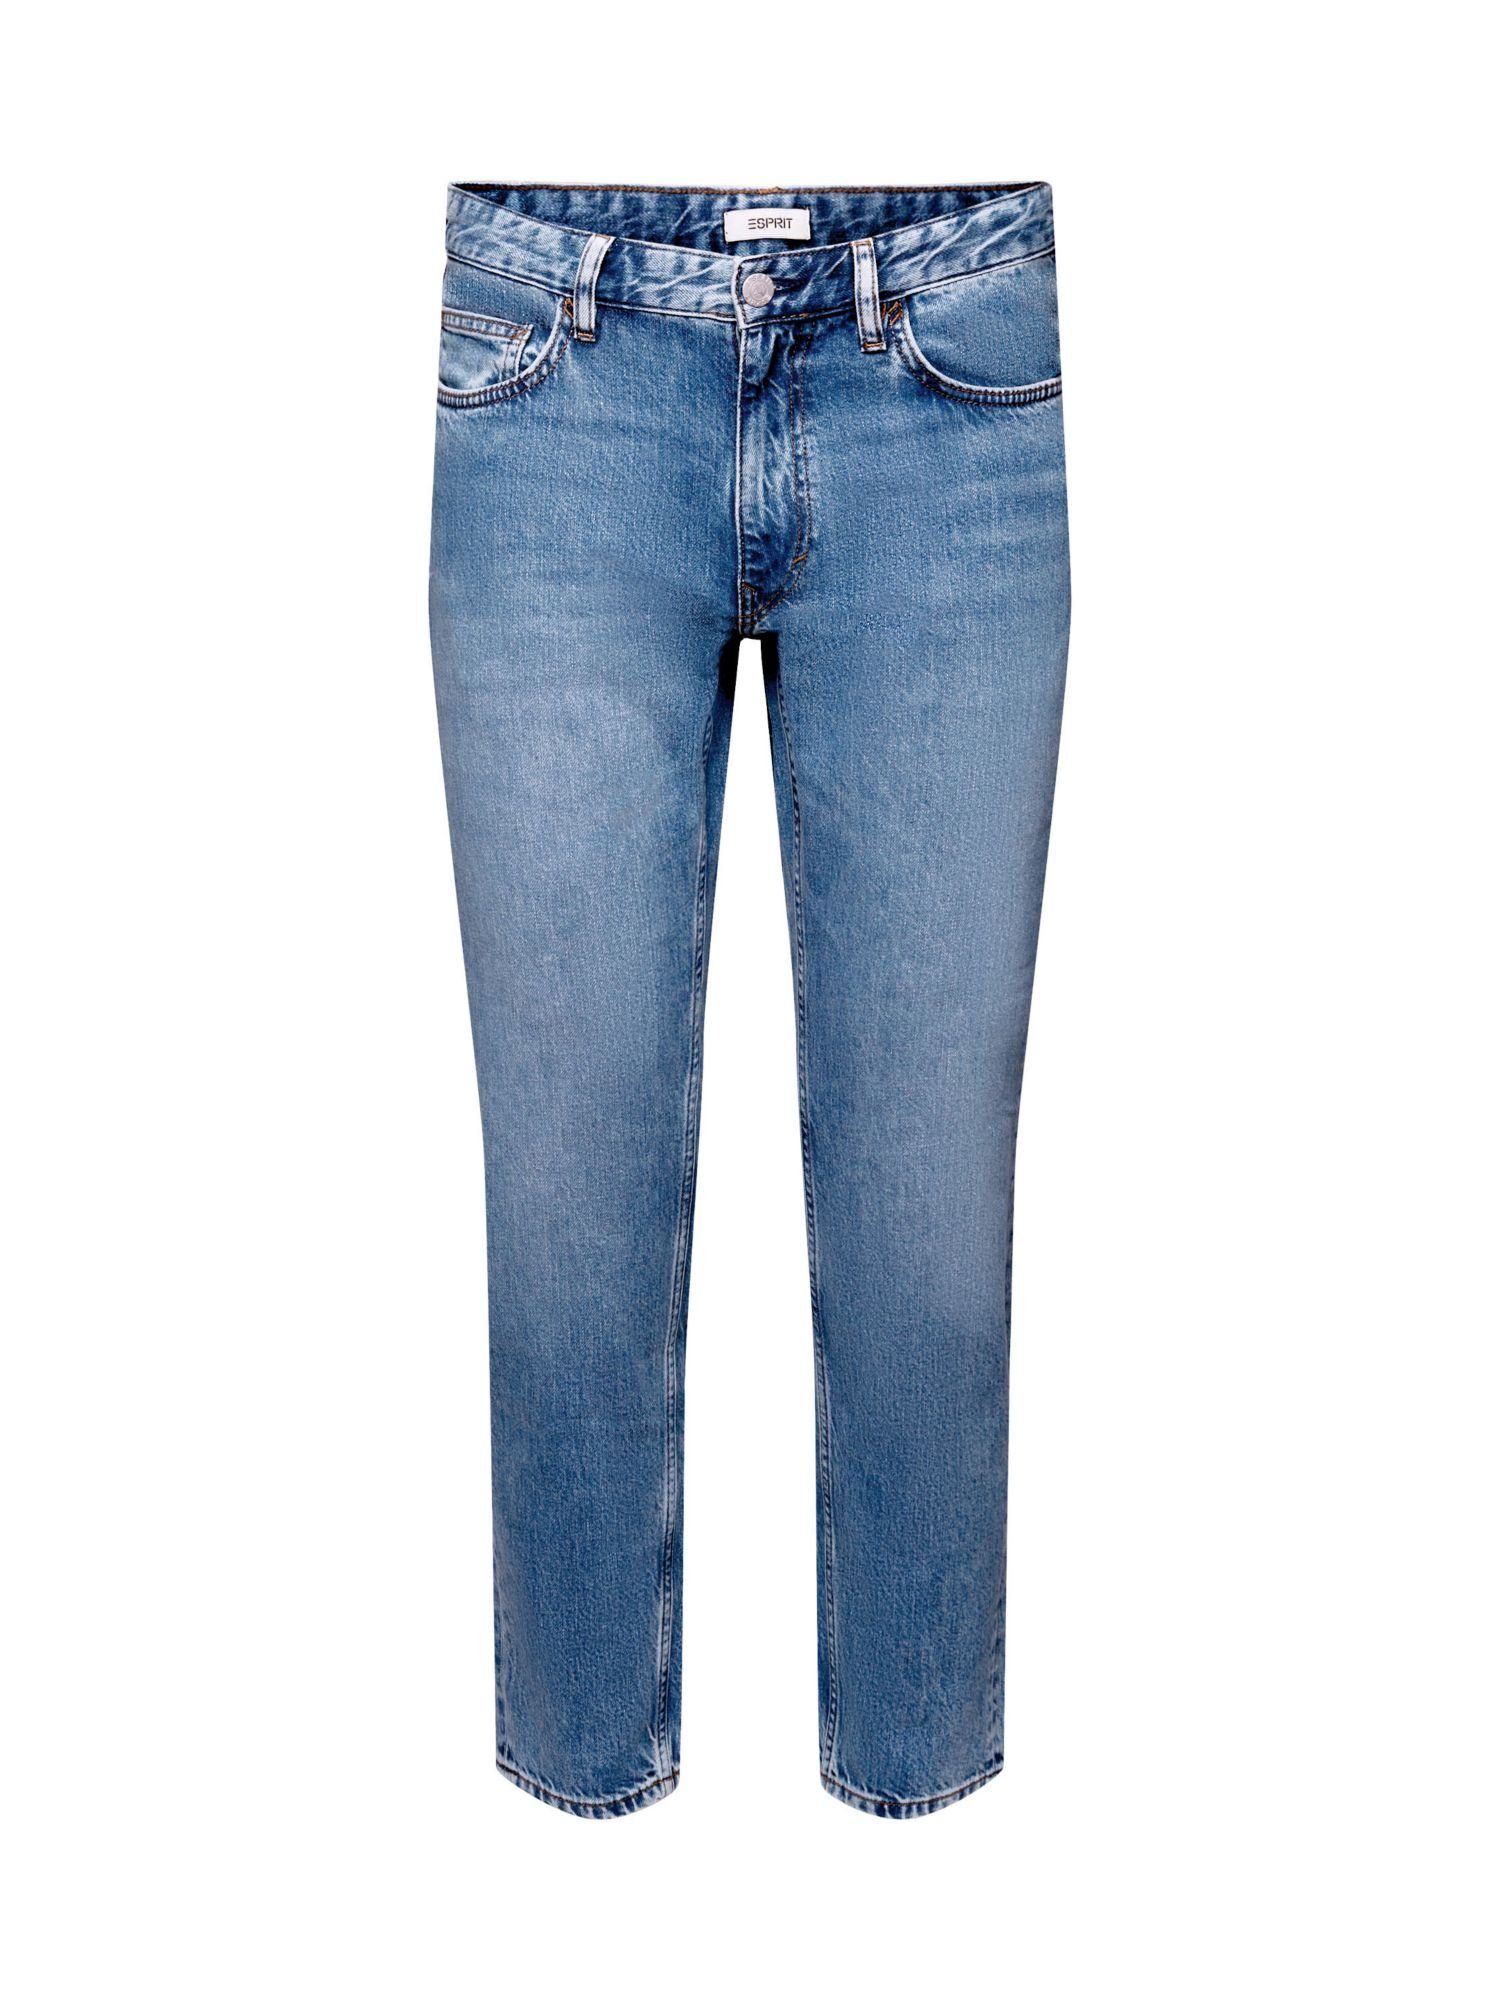 Relax-fit-Jeans Jeans in schmaler Passform Esprit bequemer,